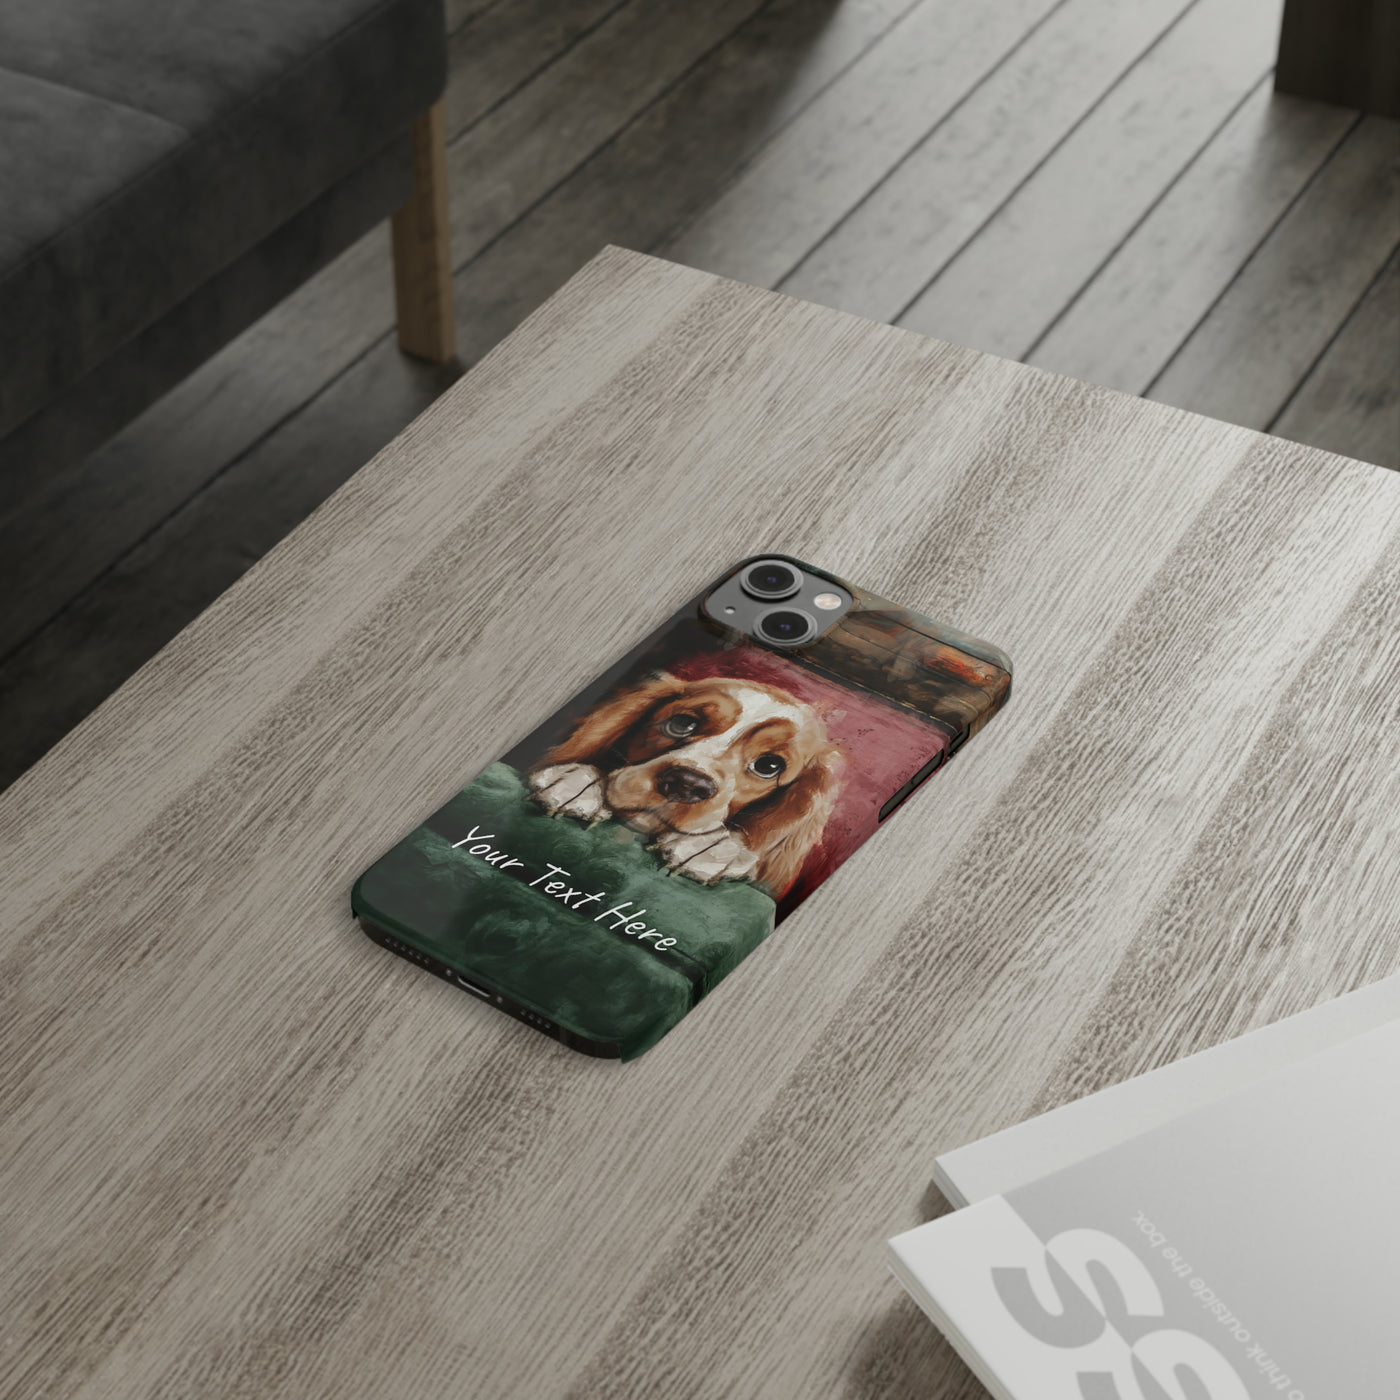 Personalized Slim Cute iPhone Cases - | iPhone 15 Case | iPhone 15 Pro Max Case, Iphone 14 Case, Iphone 14 Pro Max, Iphone 13, Cocker Spaniel Dog